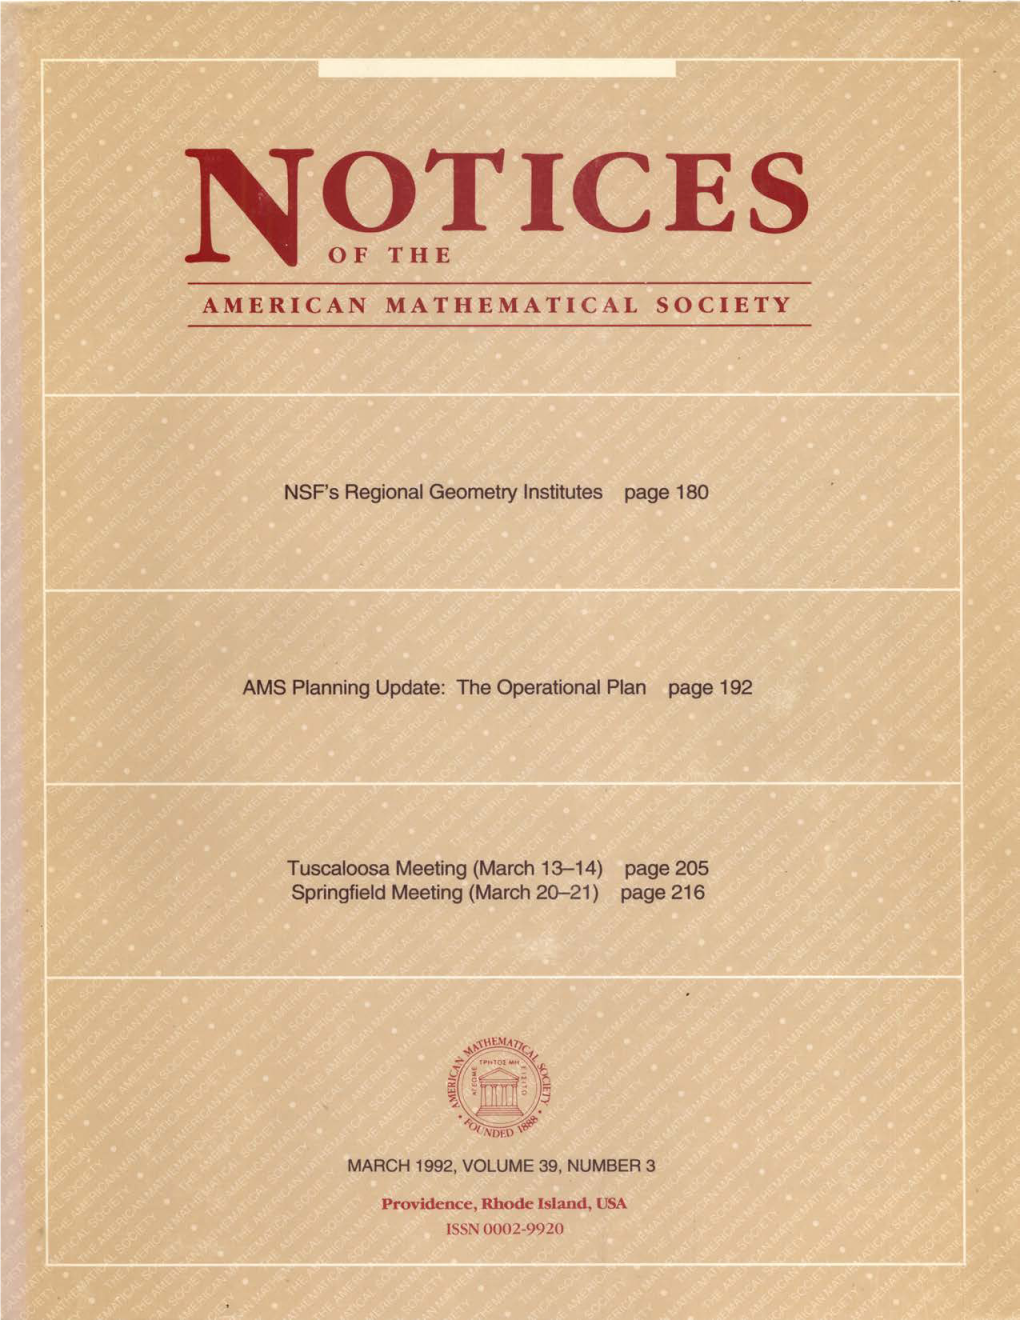 Notices of the American Mathematical Society Is Unteer and Staff Activities That Are Organized Mostly Through Its Committee Structure